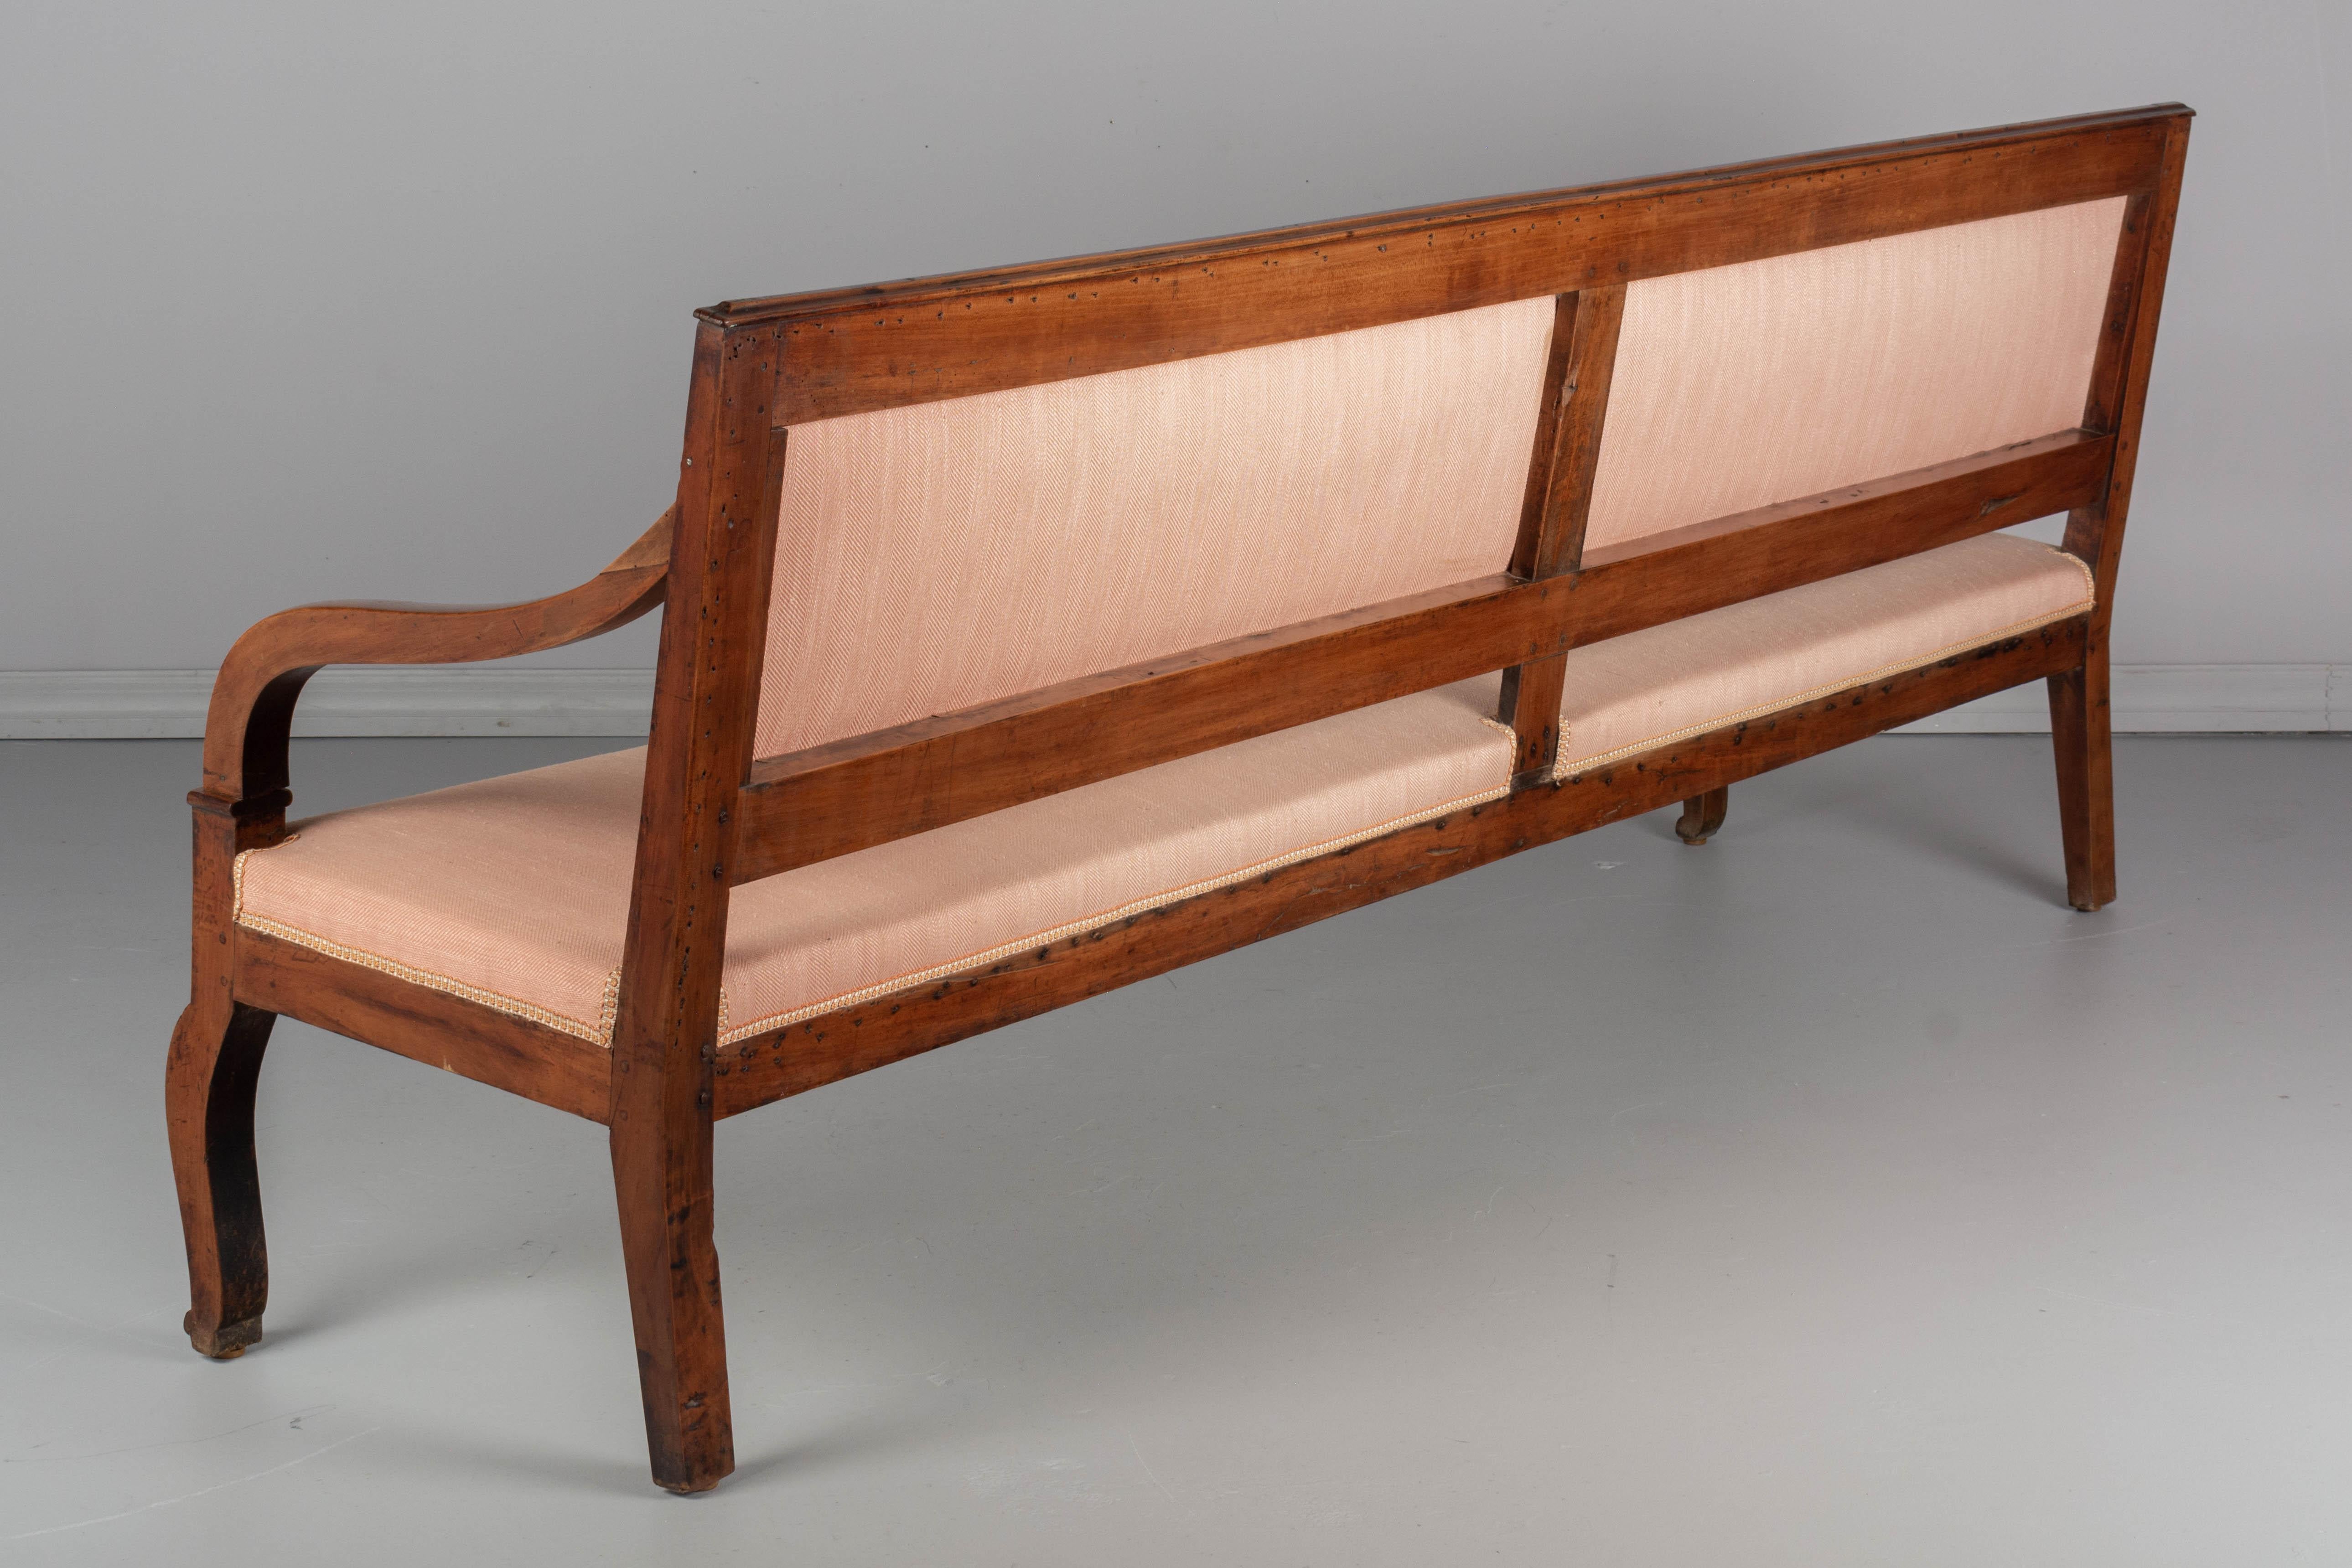 19th Century French Restauration Style Bench or Settee